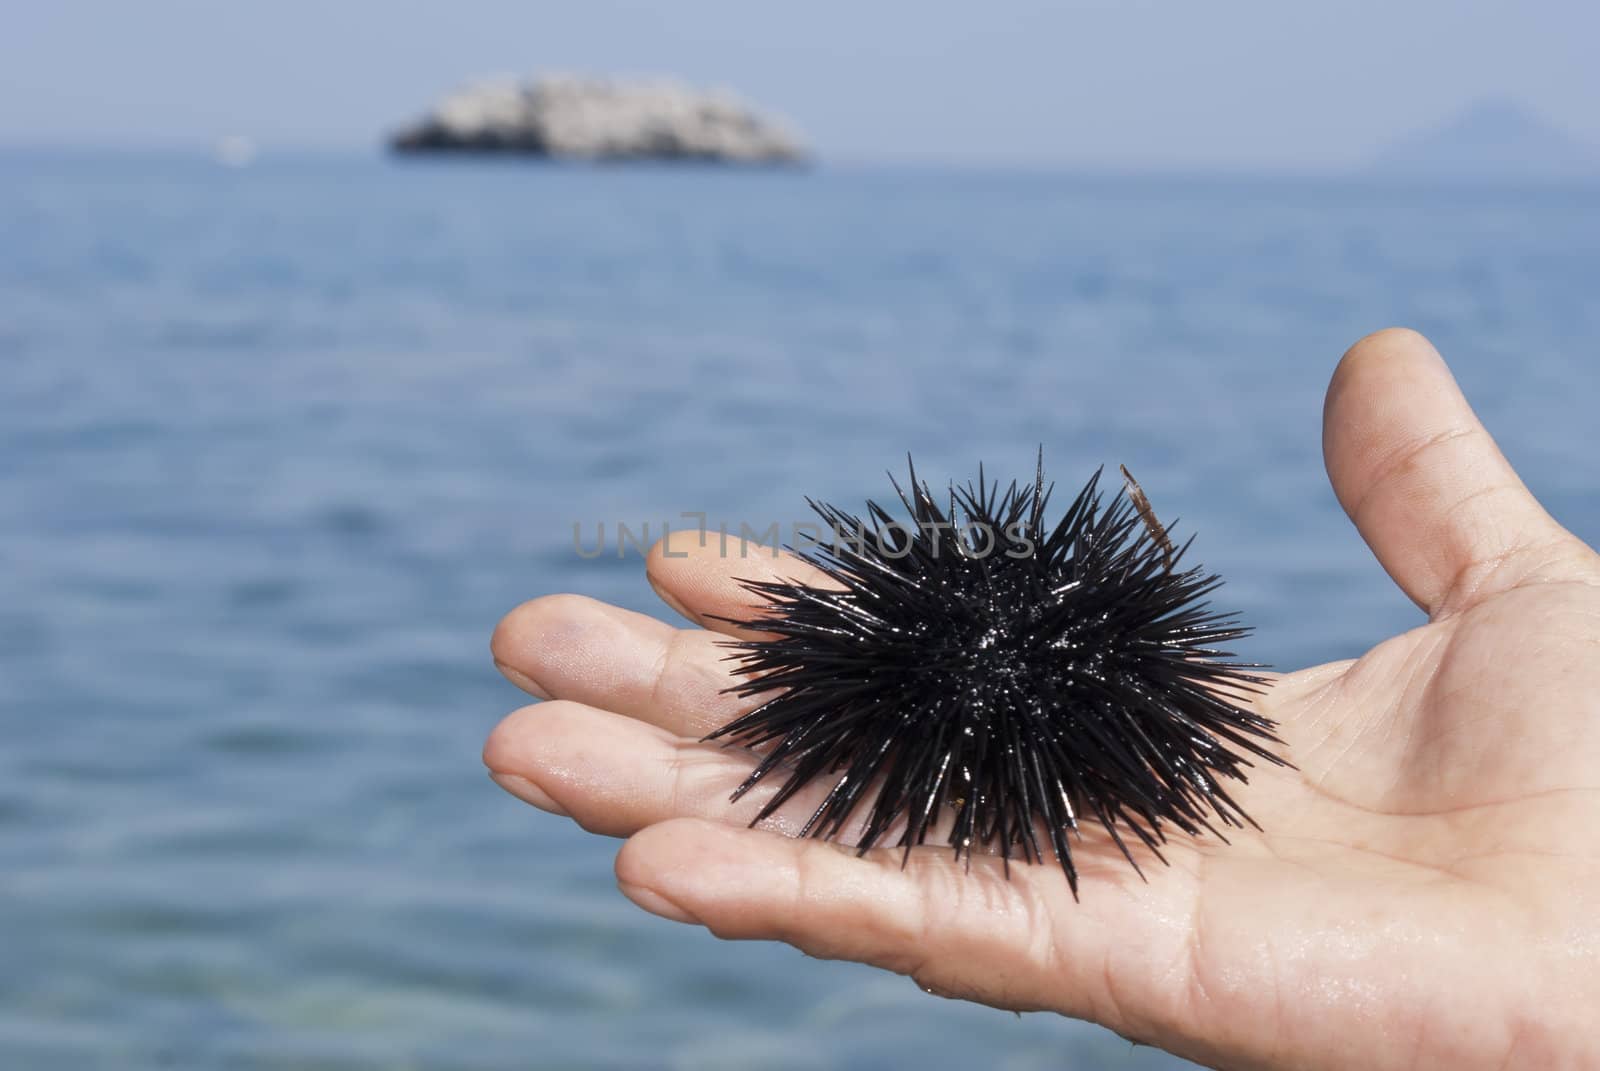 sea urchin on hand of man with the sea in the background